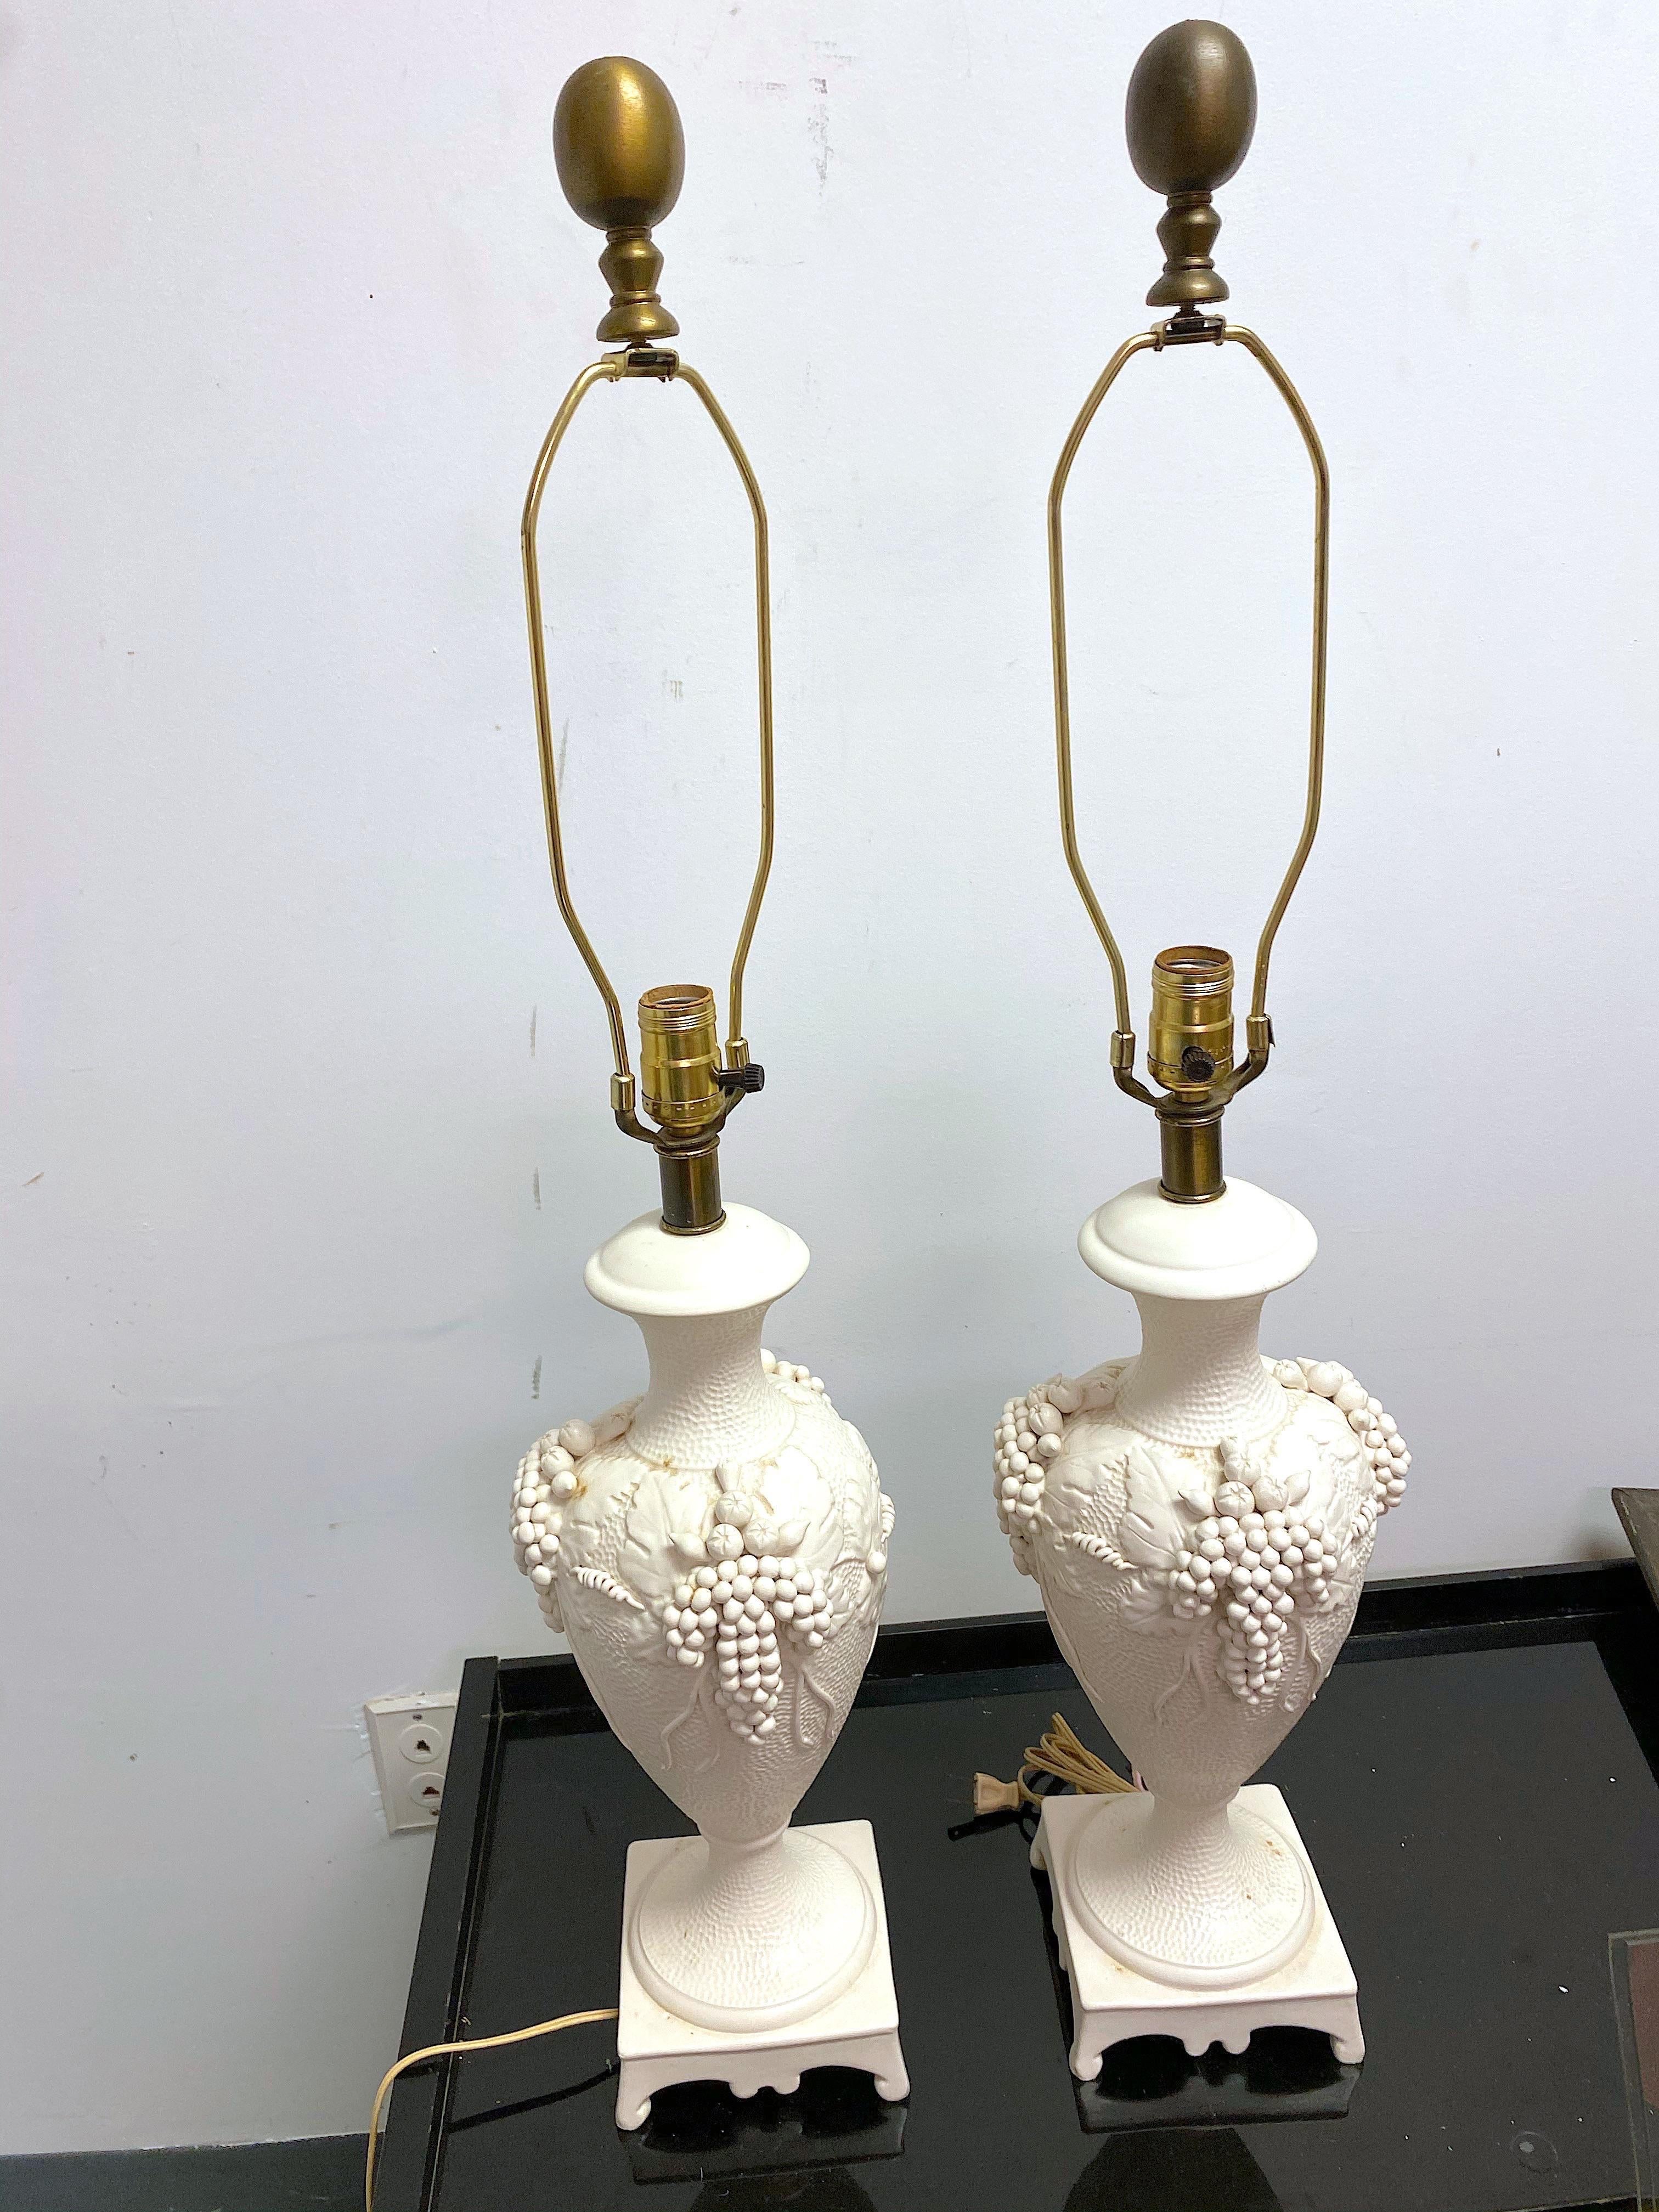 These lamps are just gorgeous! With an urn shape and a grape leaves relief. The body is highly textured and the base and neck are very smooth. They are signed “Greenspan” on the bottom as well as marked Italy. They have the original harps and gold